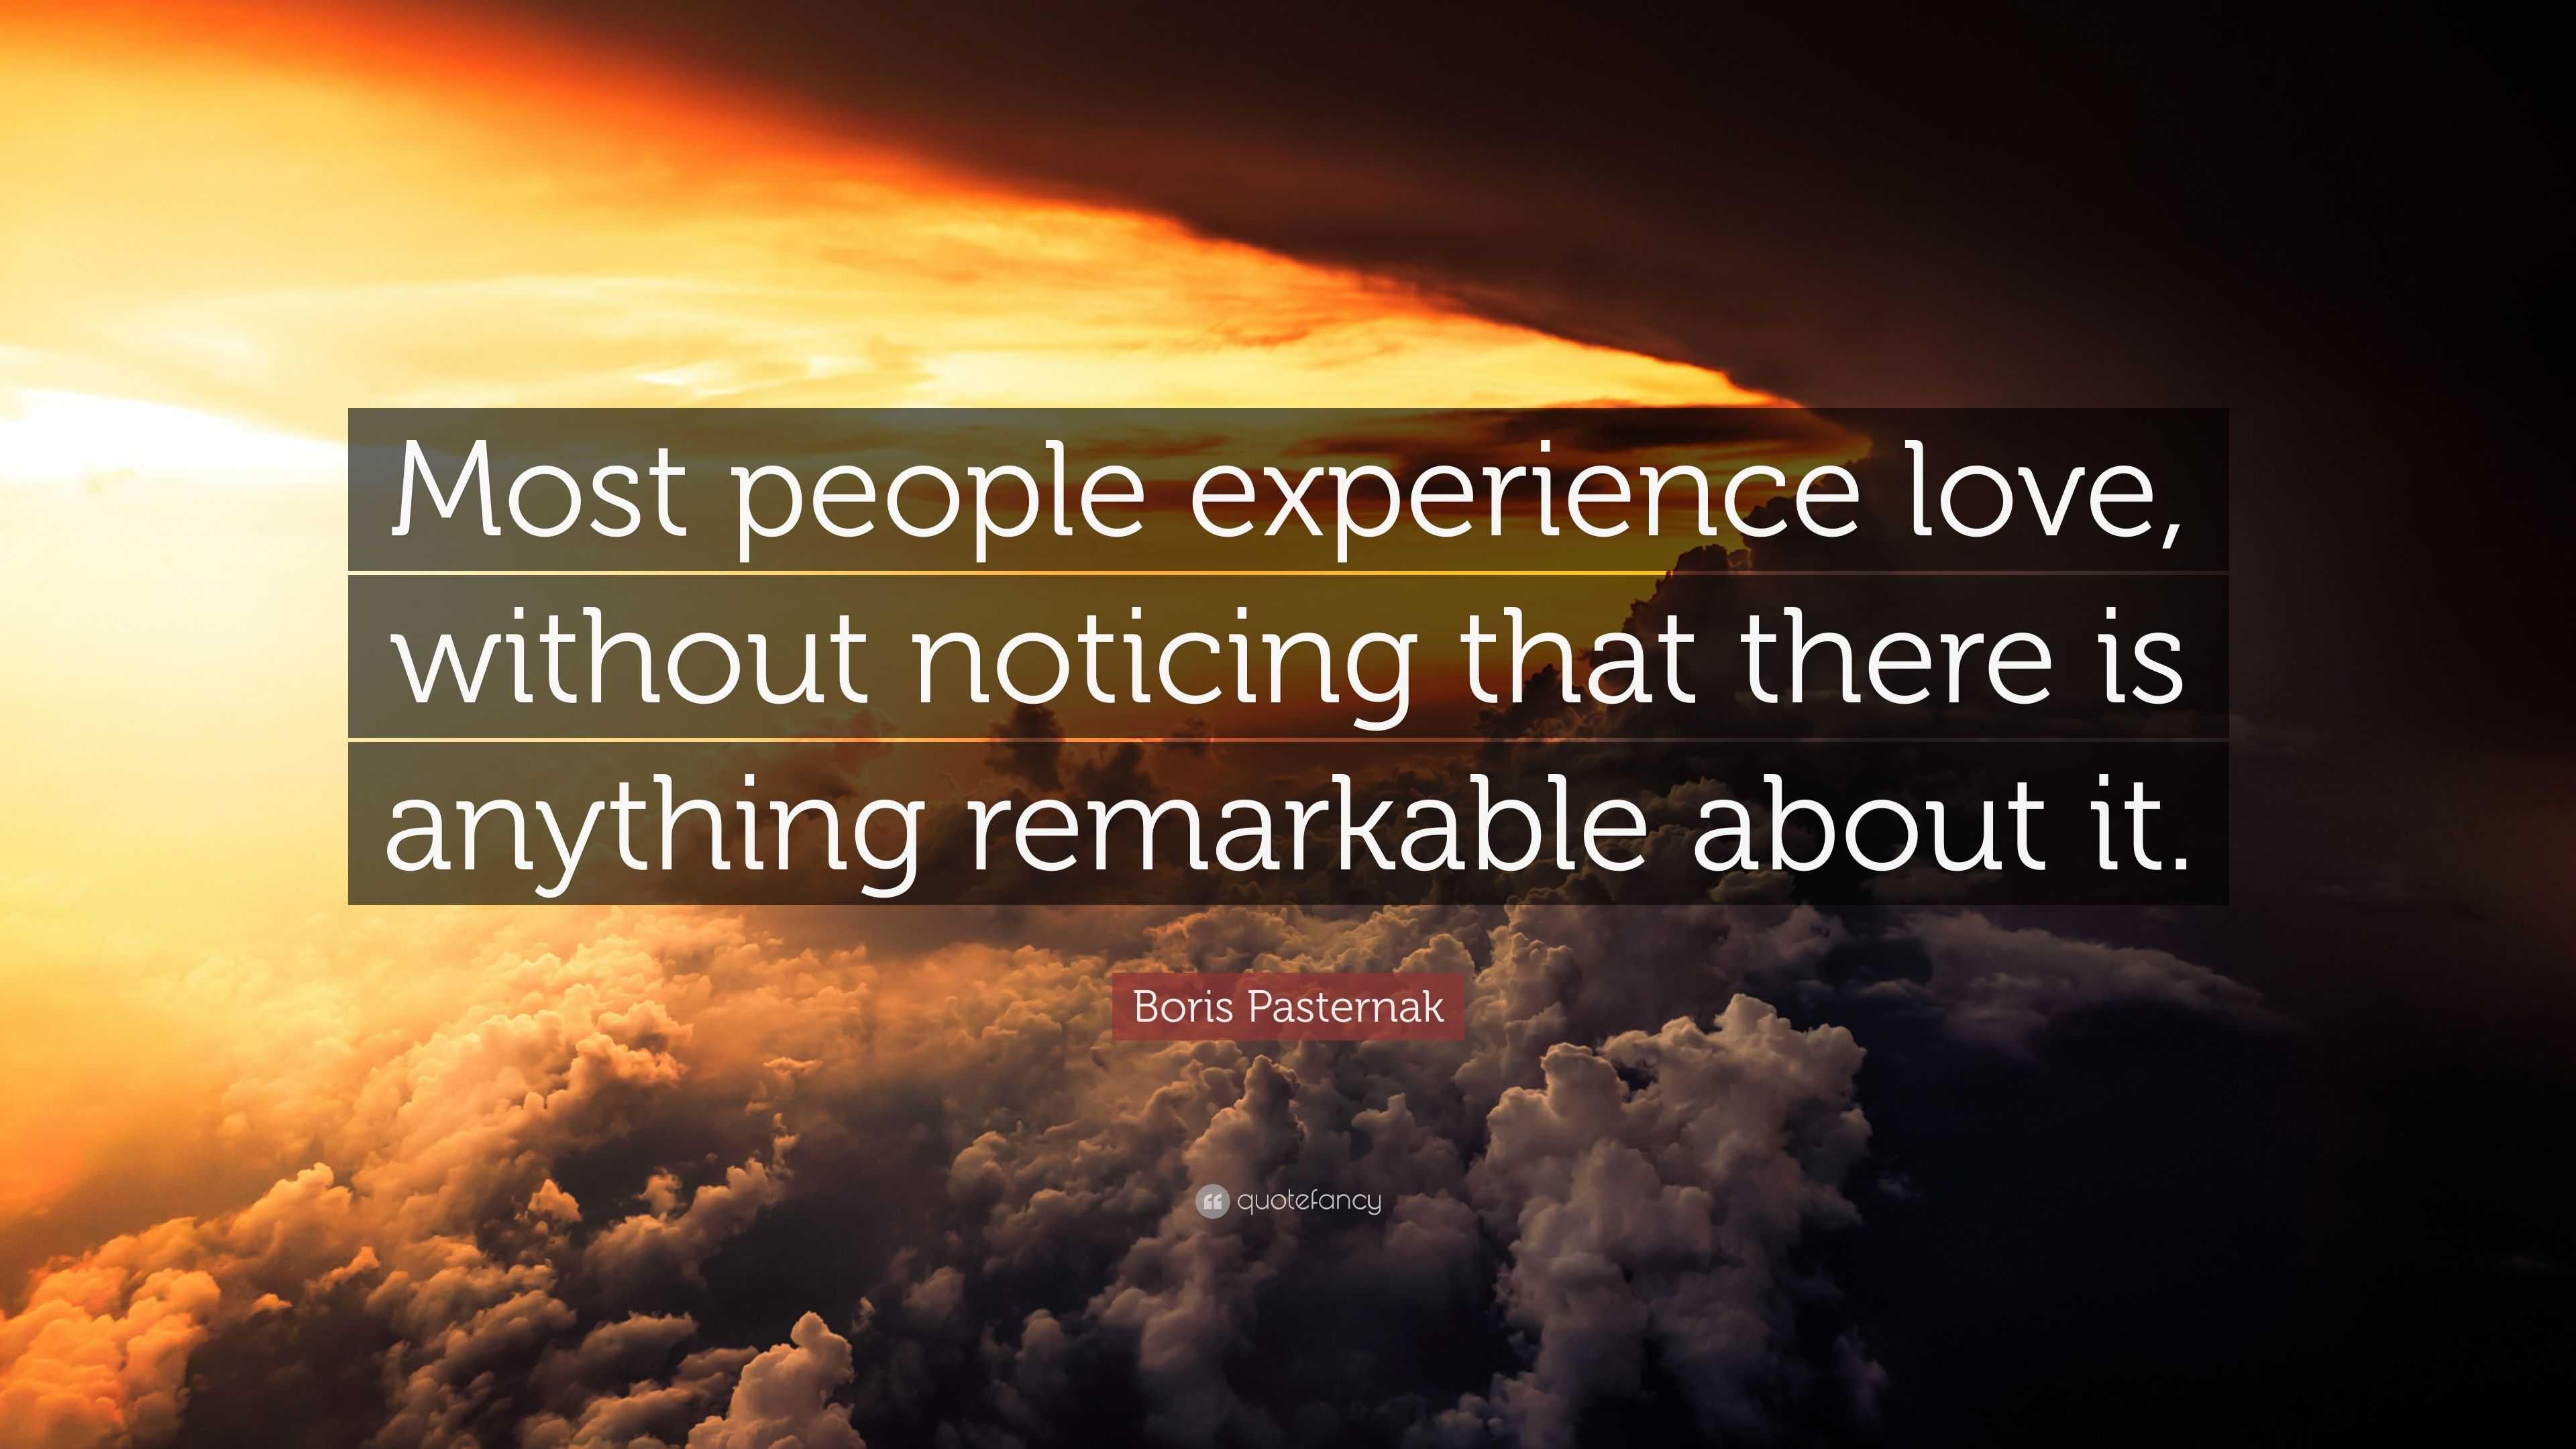 Boris Pasternak Quote: “Most people experience love, without noticing ...